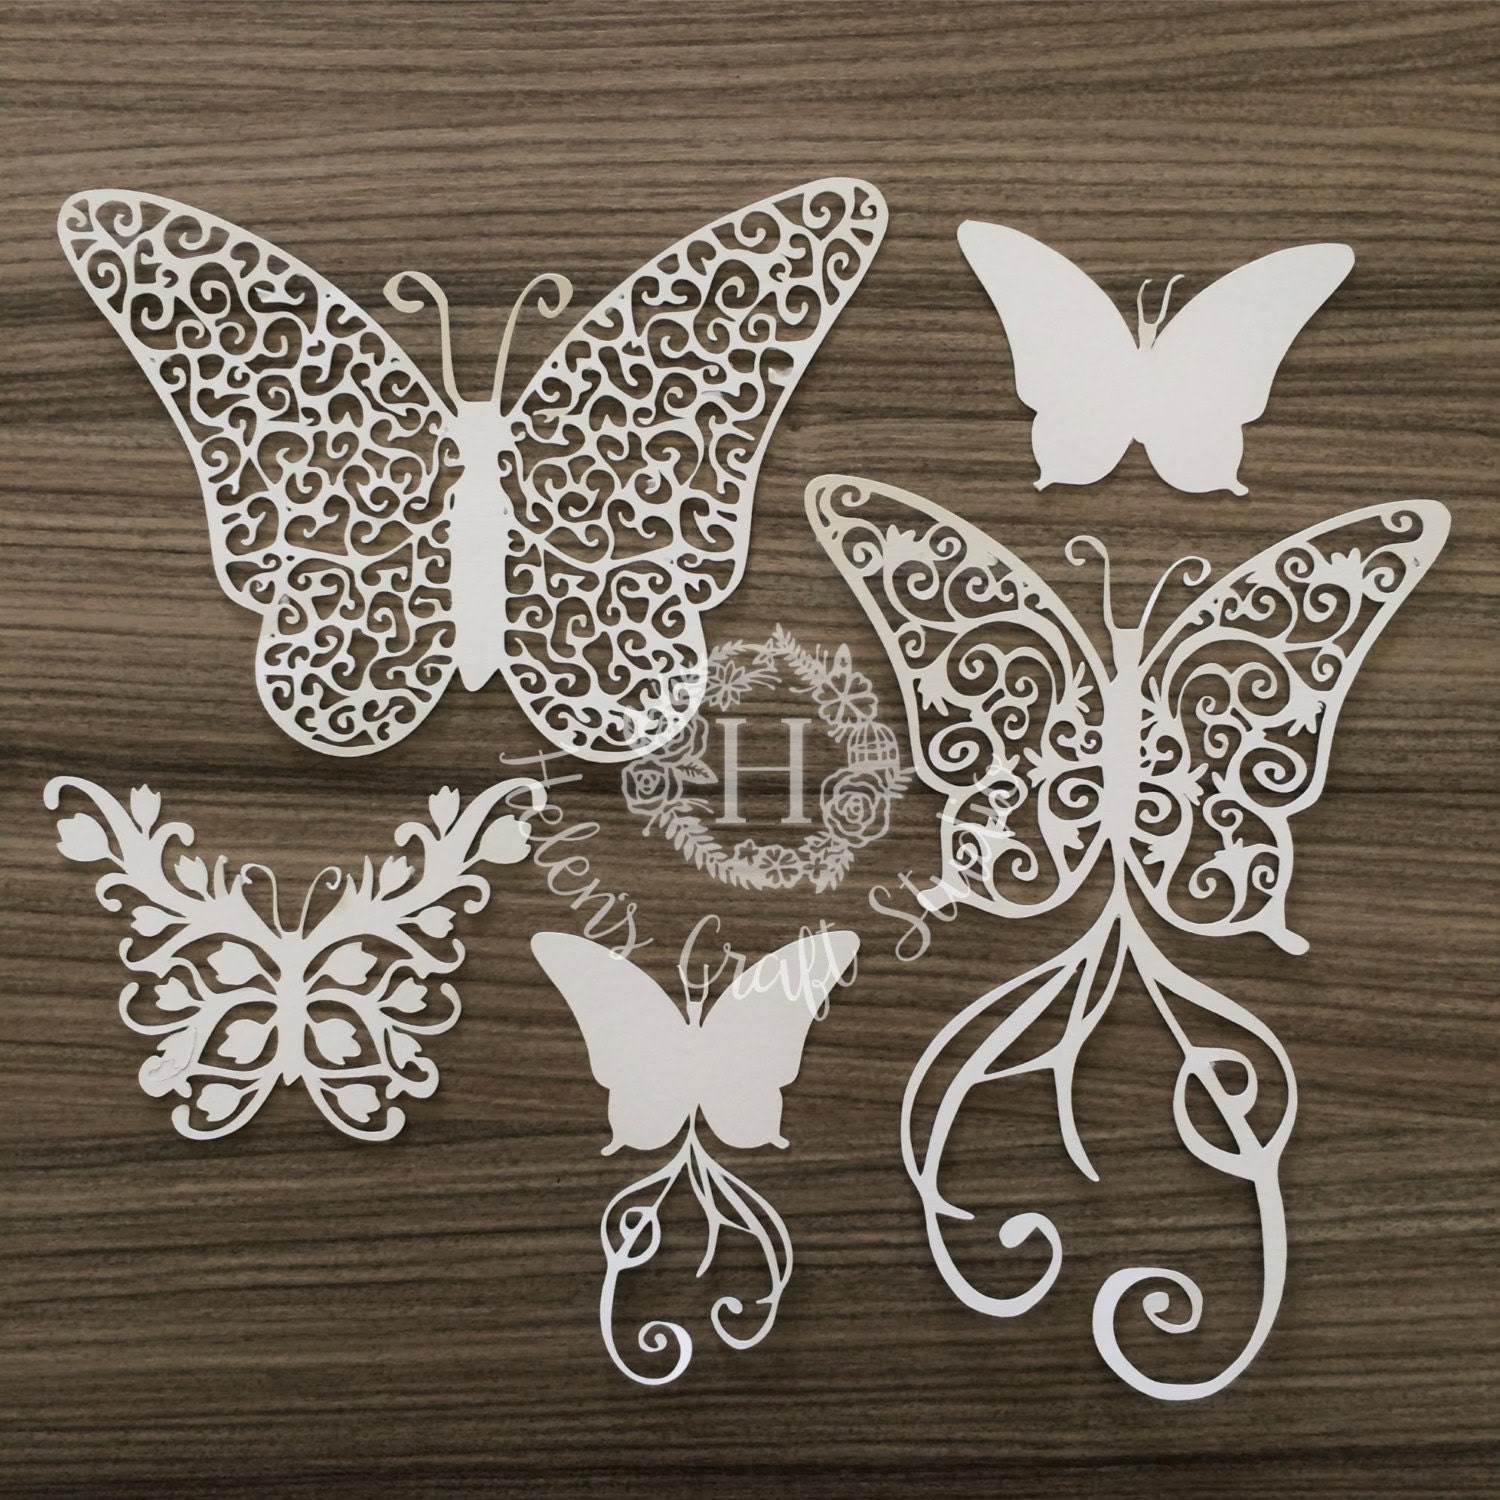 Free Cricut Butterfly Template - Pin by Lucie Camirand on Cricut stuff ...